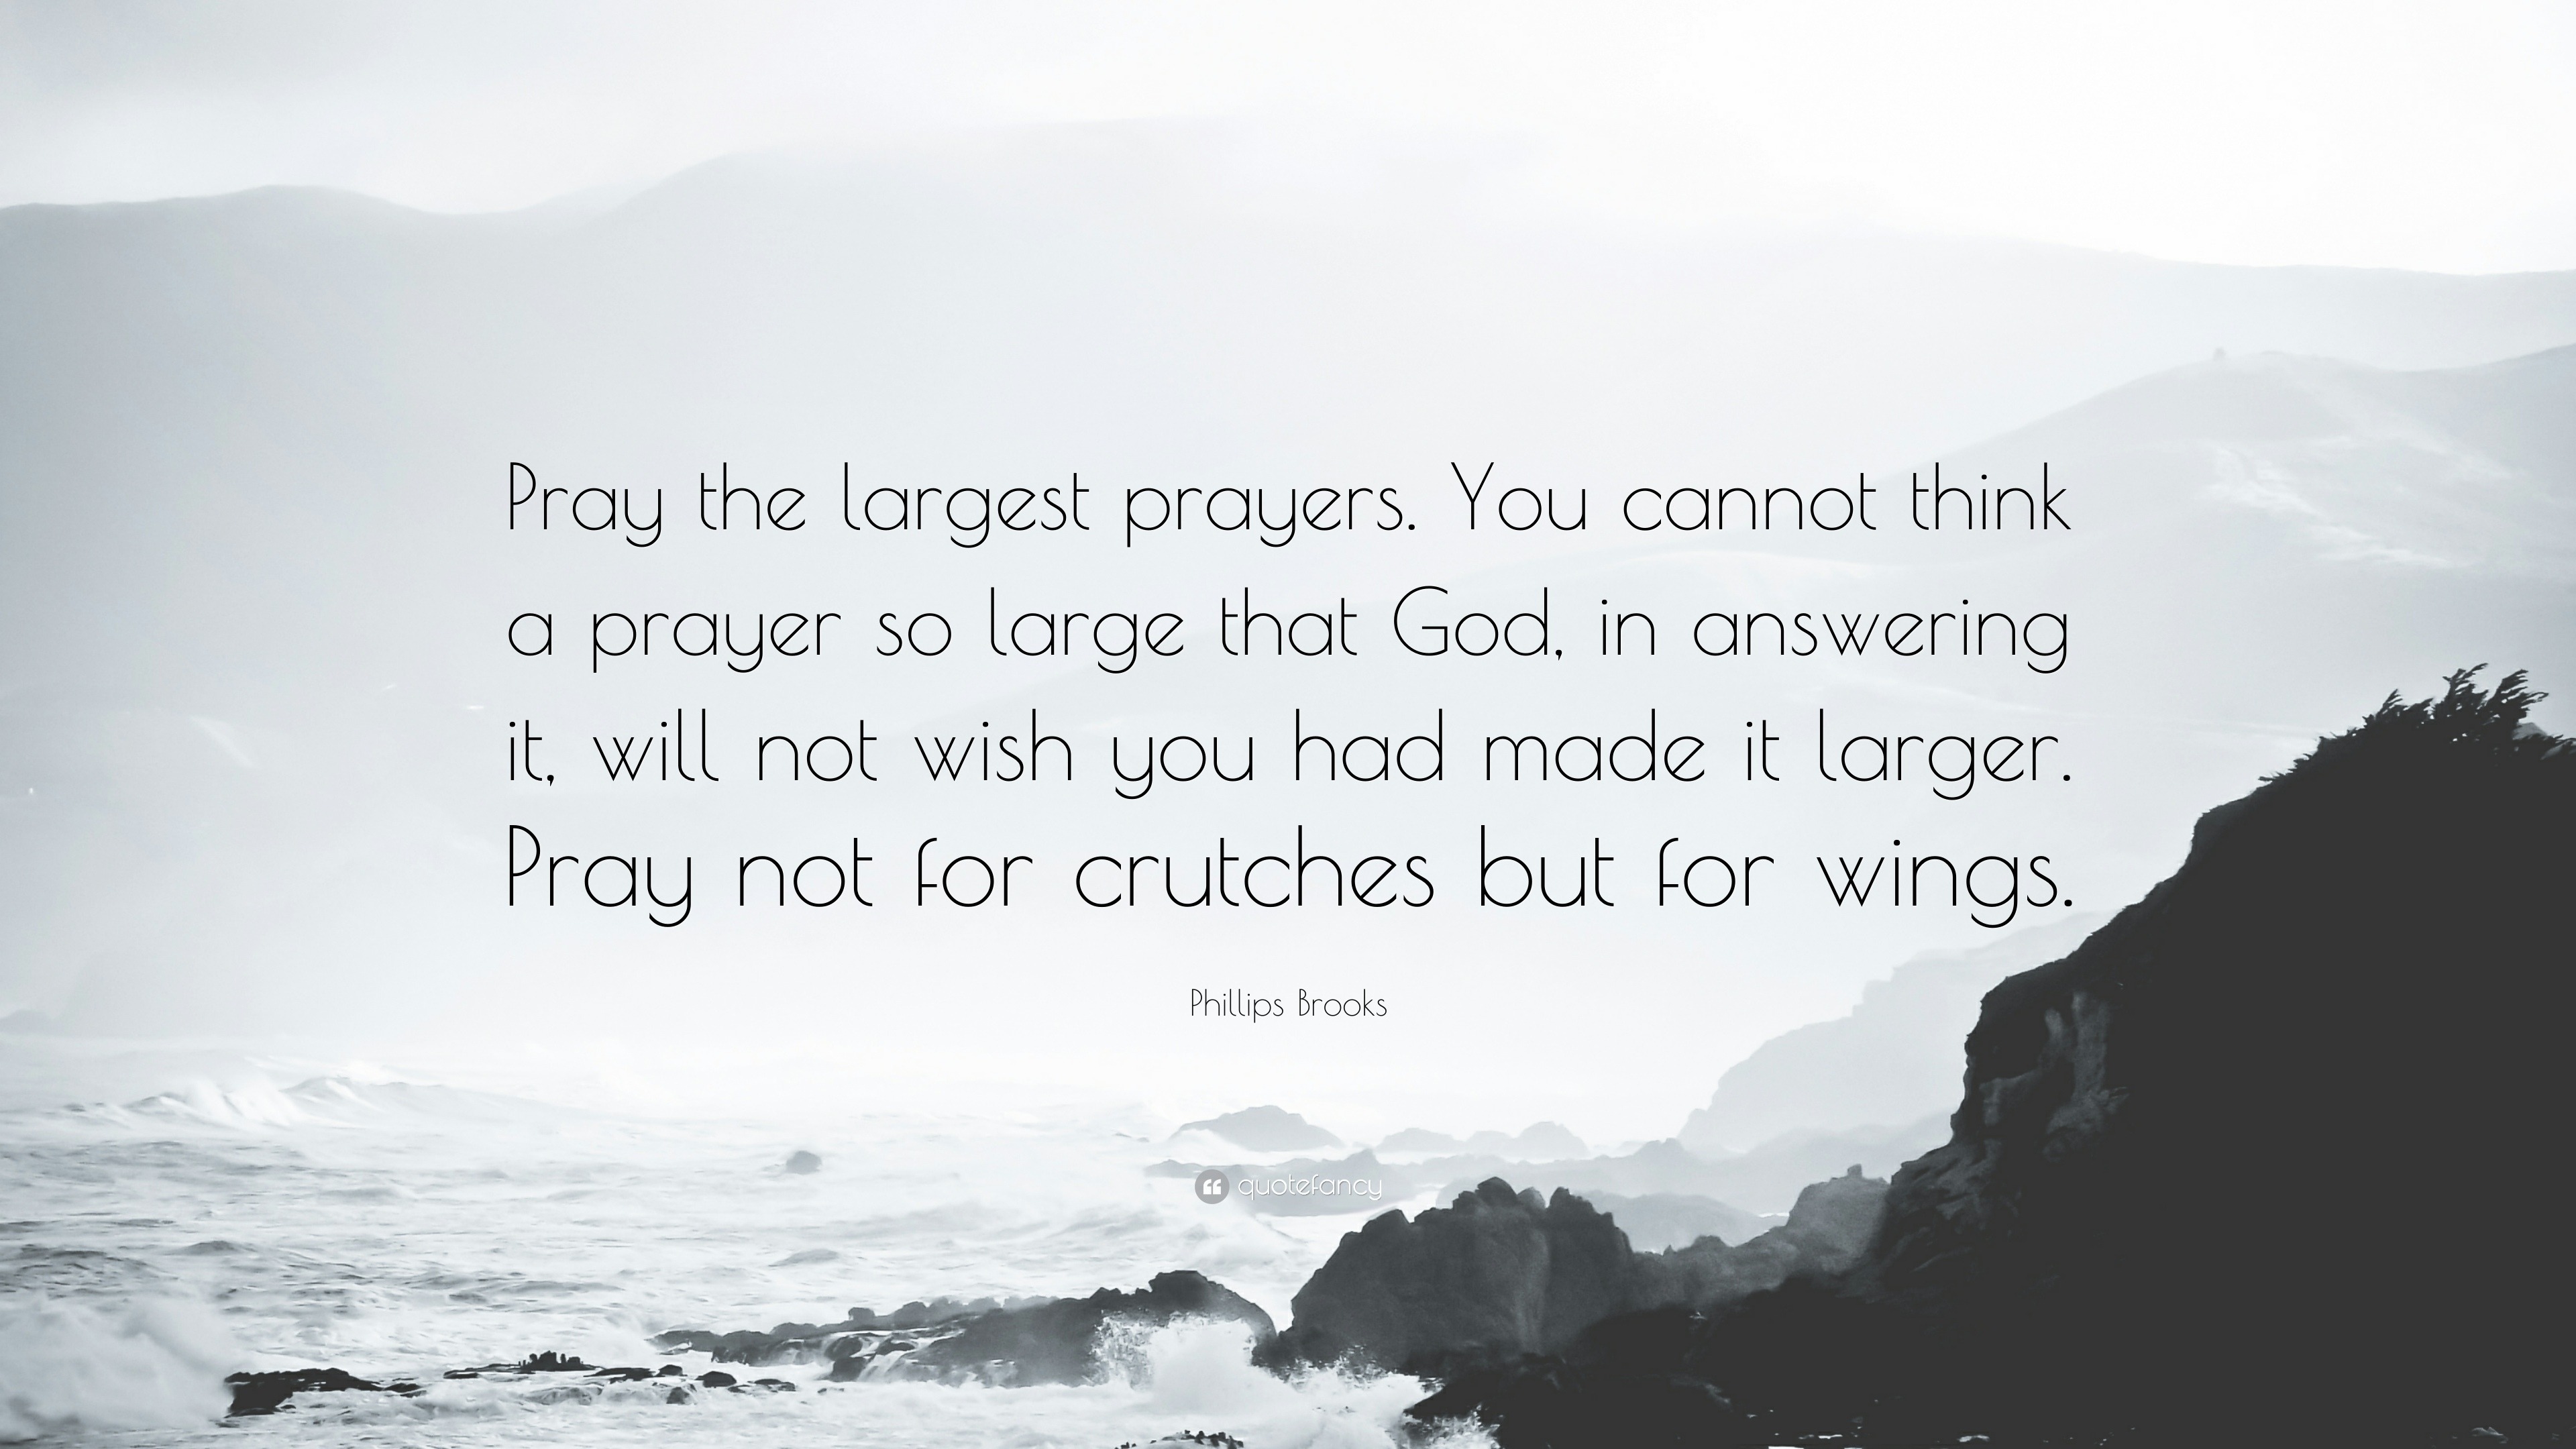 588023-Phillips-Brooks-Quote-Pray-the-largest-prayers-You-cannot-think-a.jpg